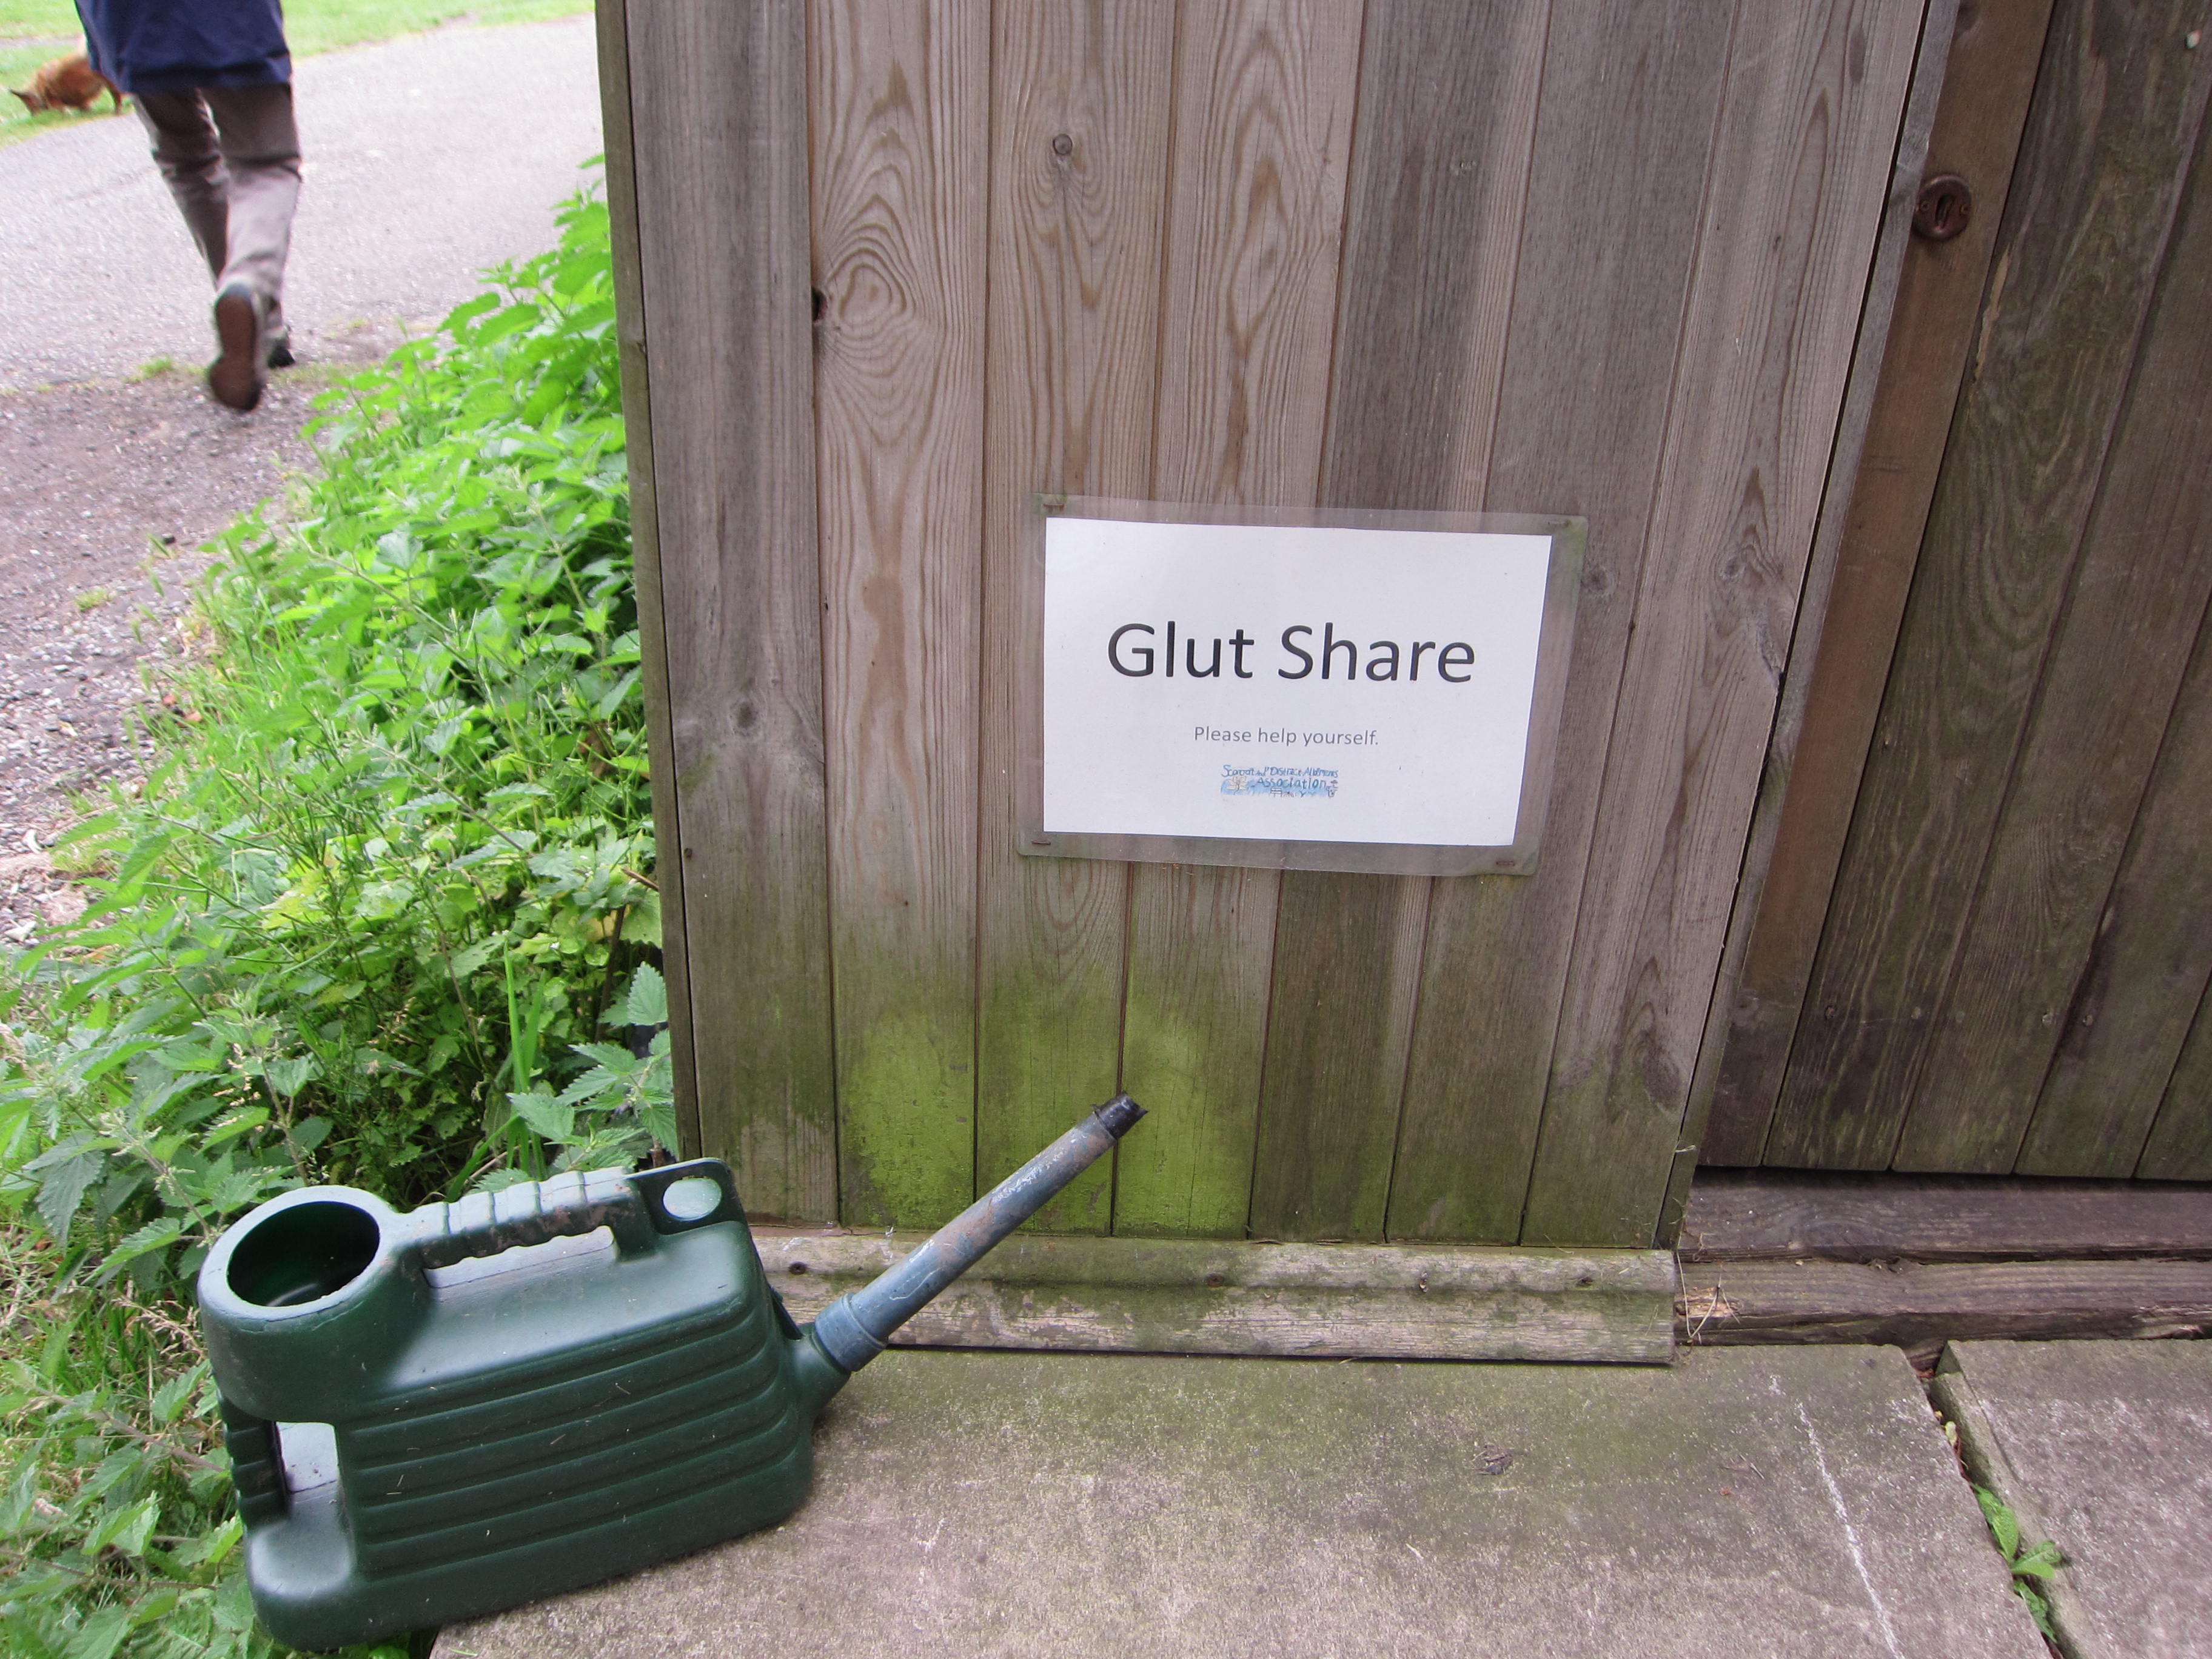 Glut Share is the name for our givesies-takesies areas. I guess we don't really have a name for that.